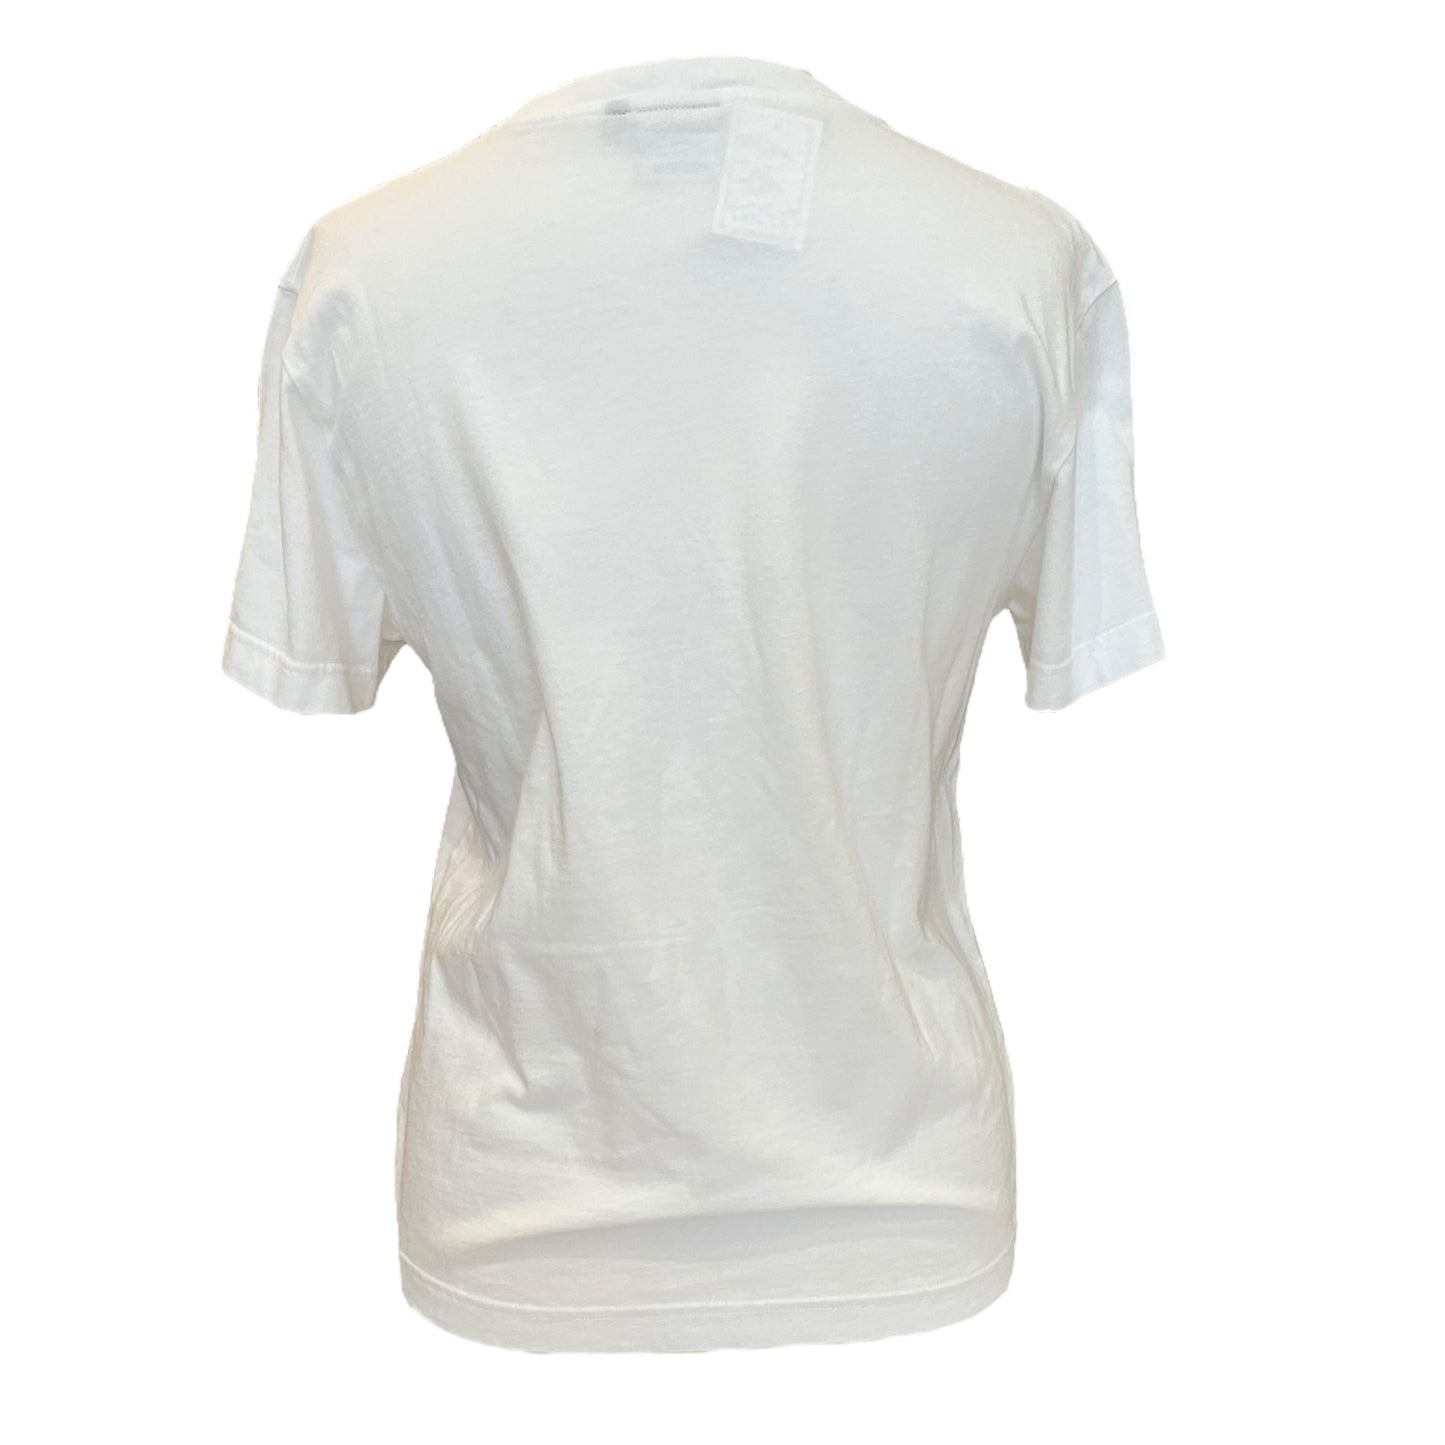 Carne Club White Embroidered T Shirt - 10